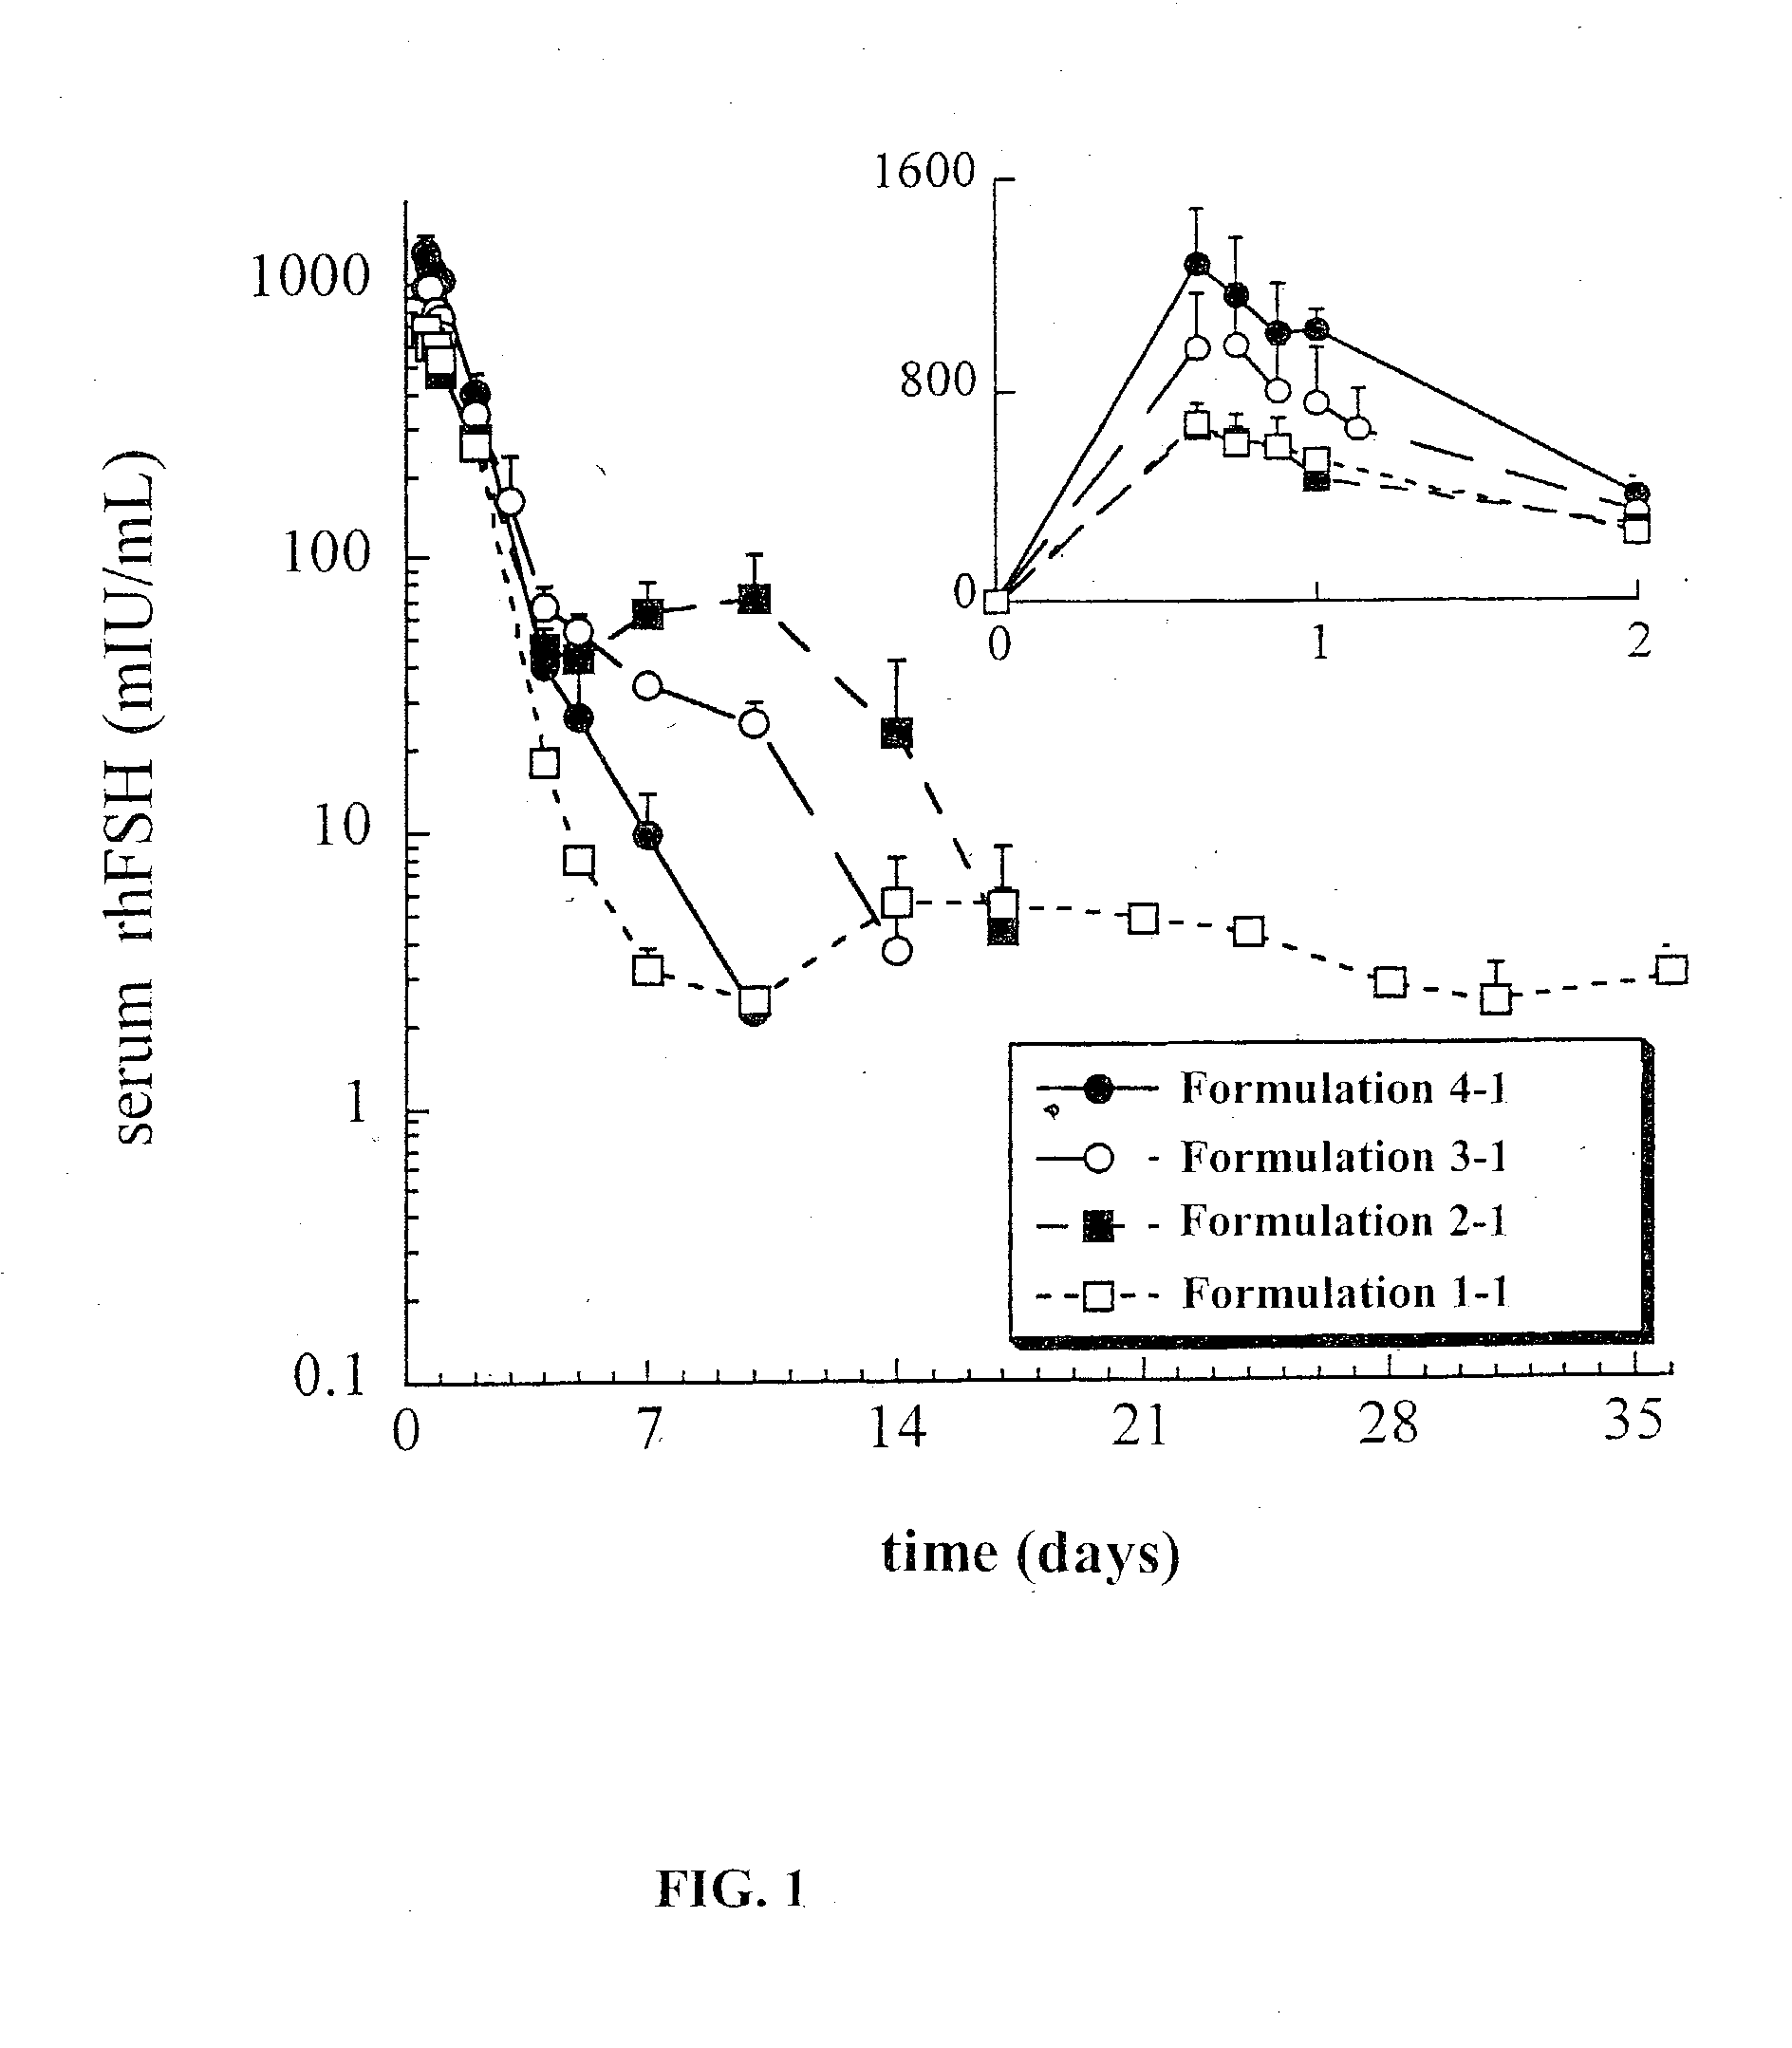 Polymer-based compositions for sustained release